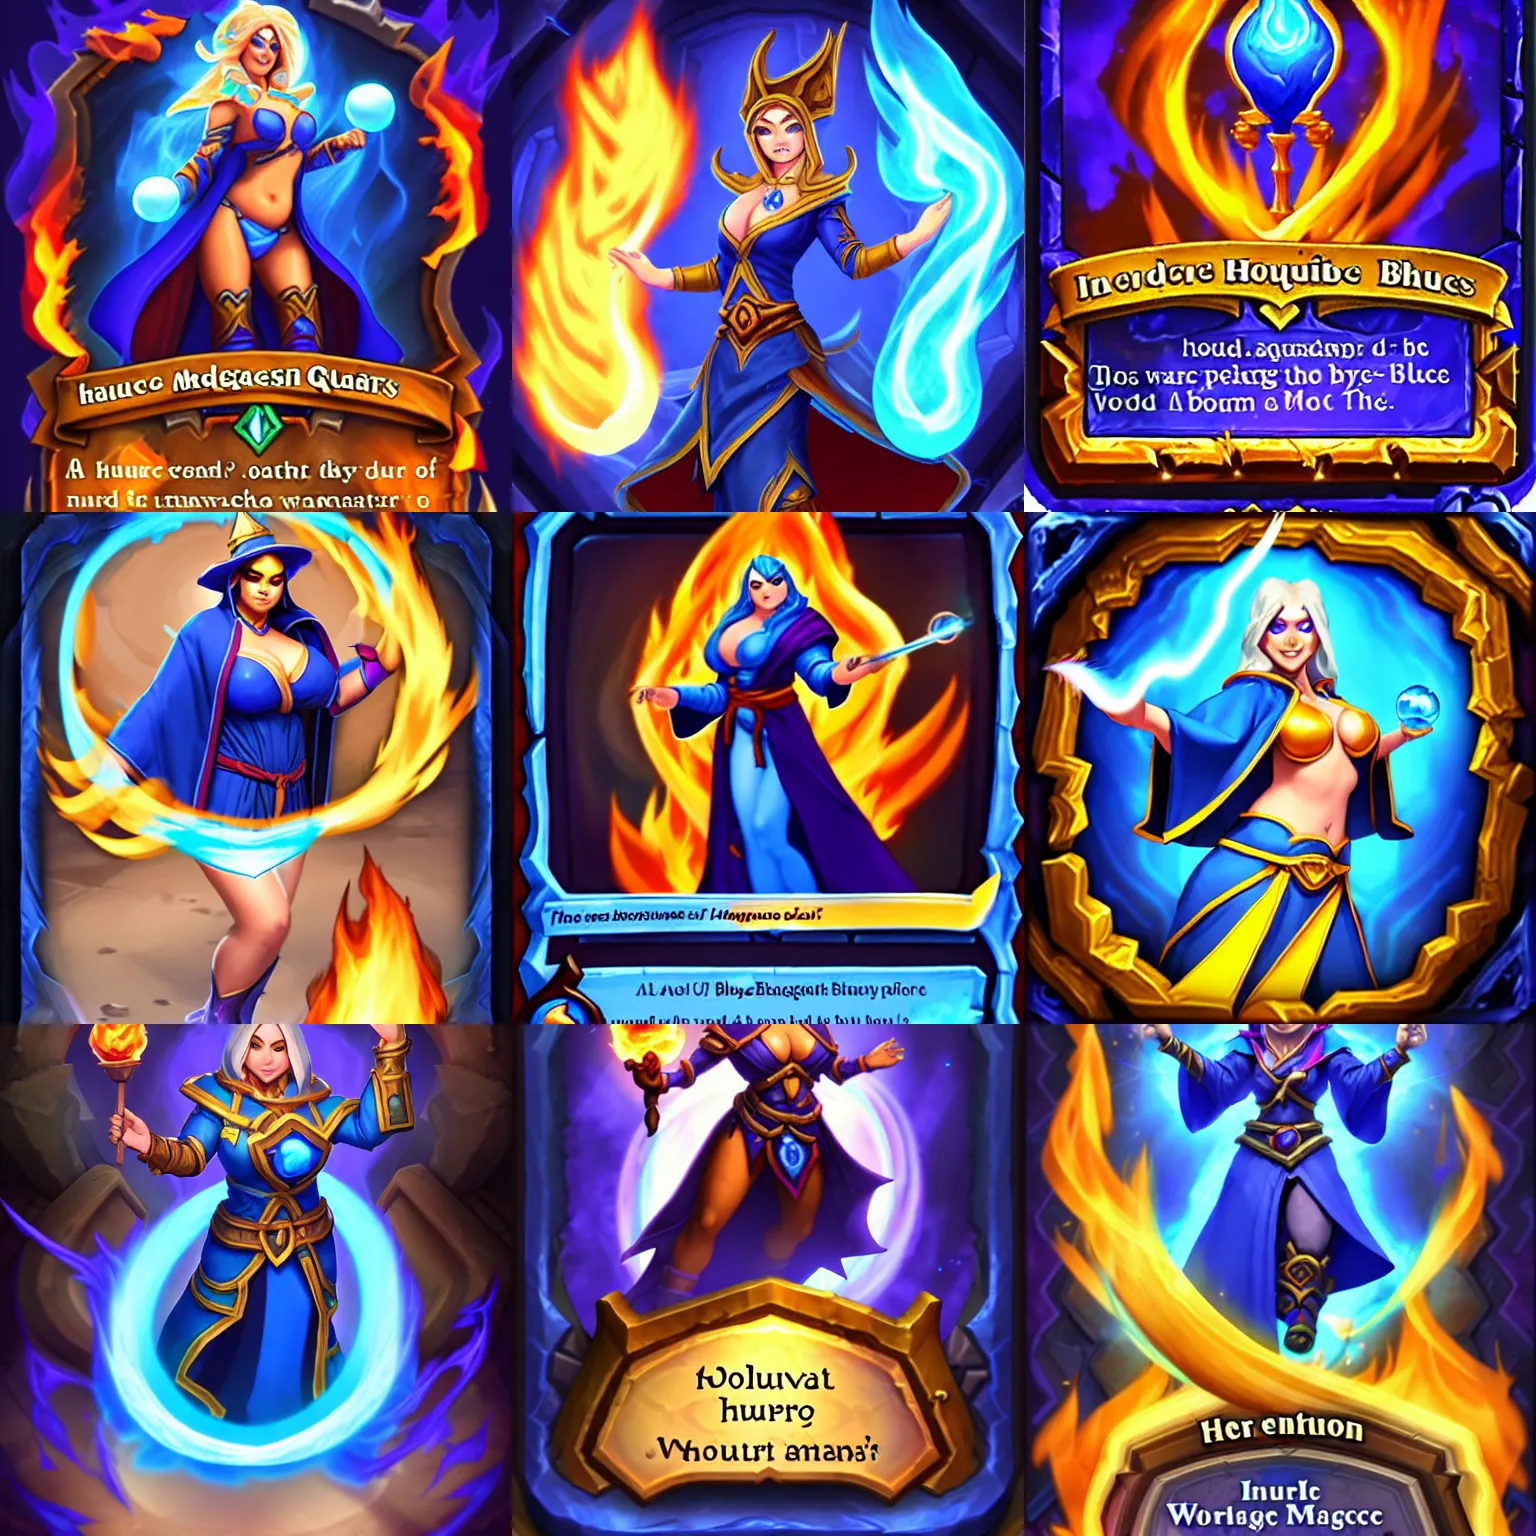 Prompt: Who : a mage with a blue robe casting a fire ball ; Body type : voluptious hourglass ; IMPORTANT : Hearthstone official splash art, award winning, trending